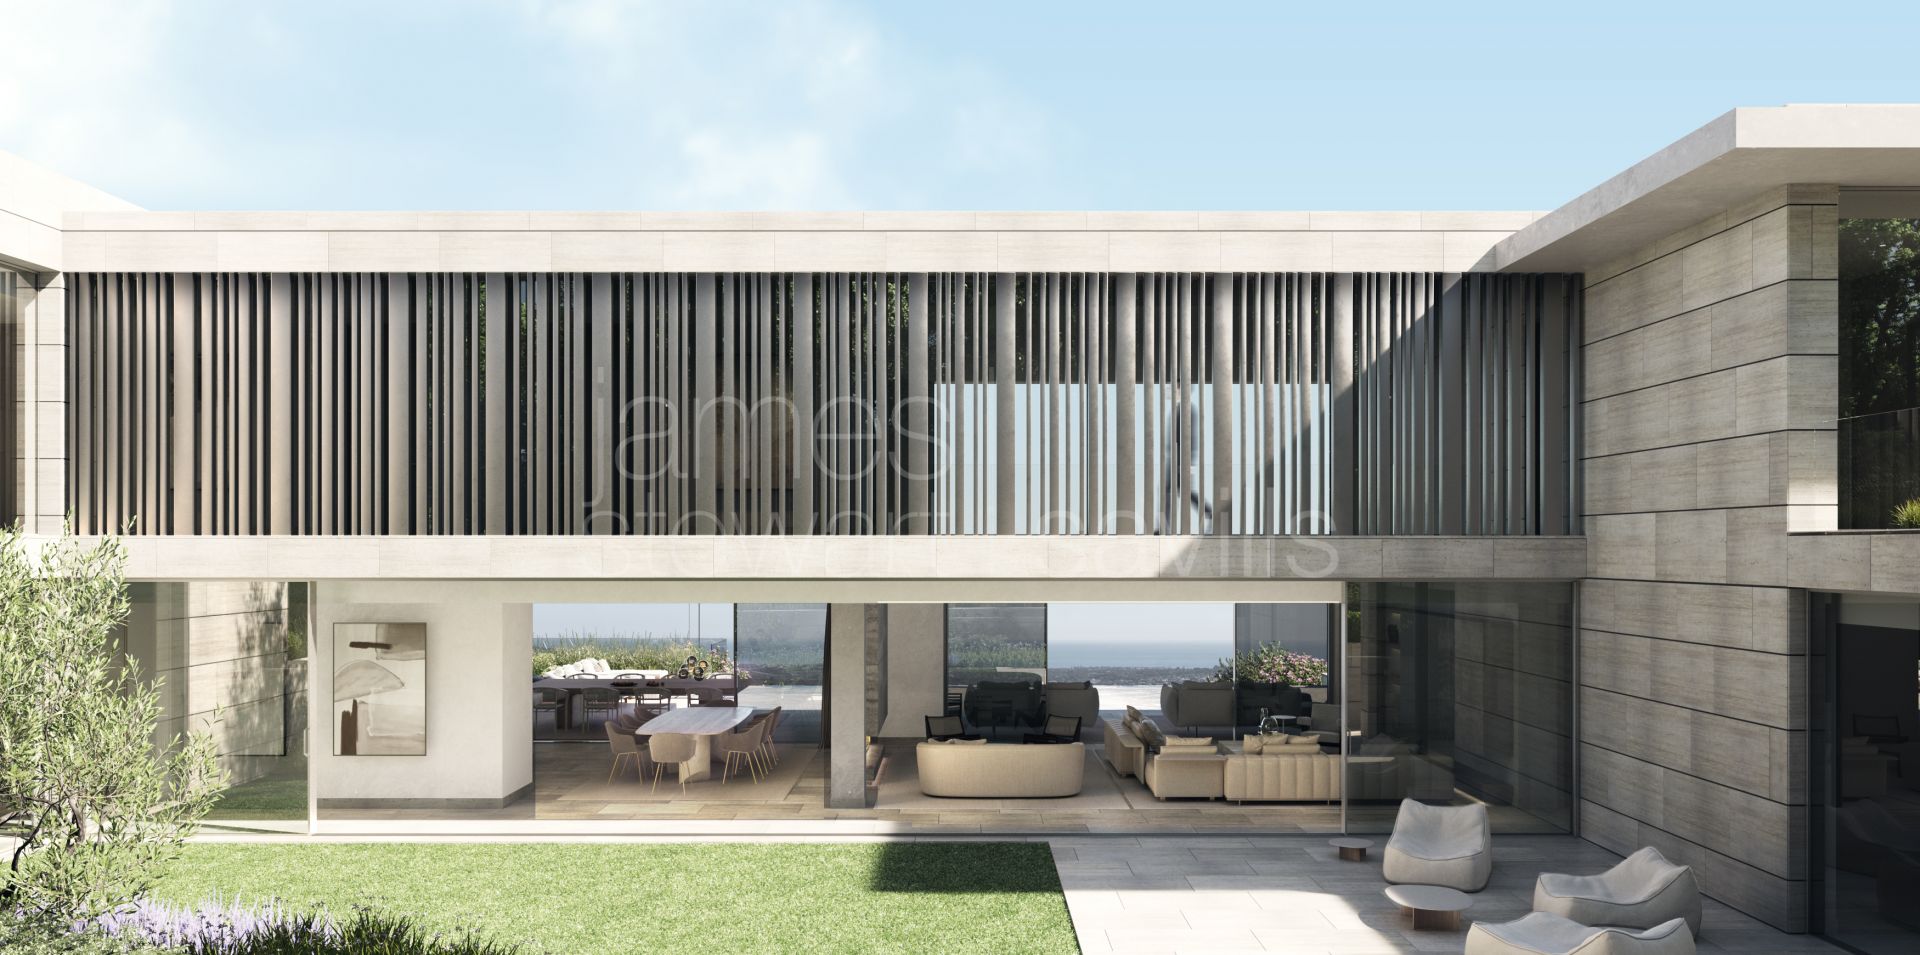 Spectacular villa PANORAMAH with great privacy and fantastic views in La Reserva de Sotogrande to be completed by Summer 2023